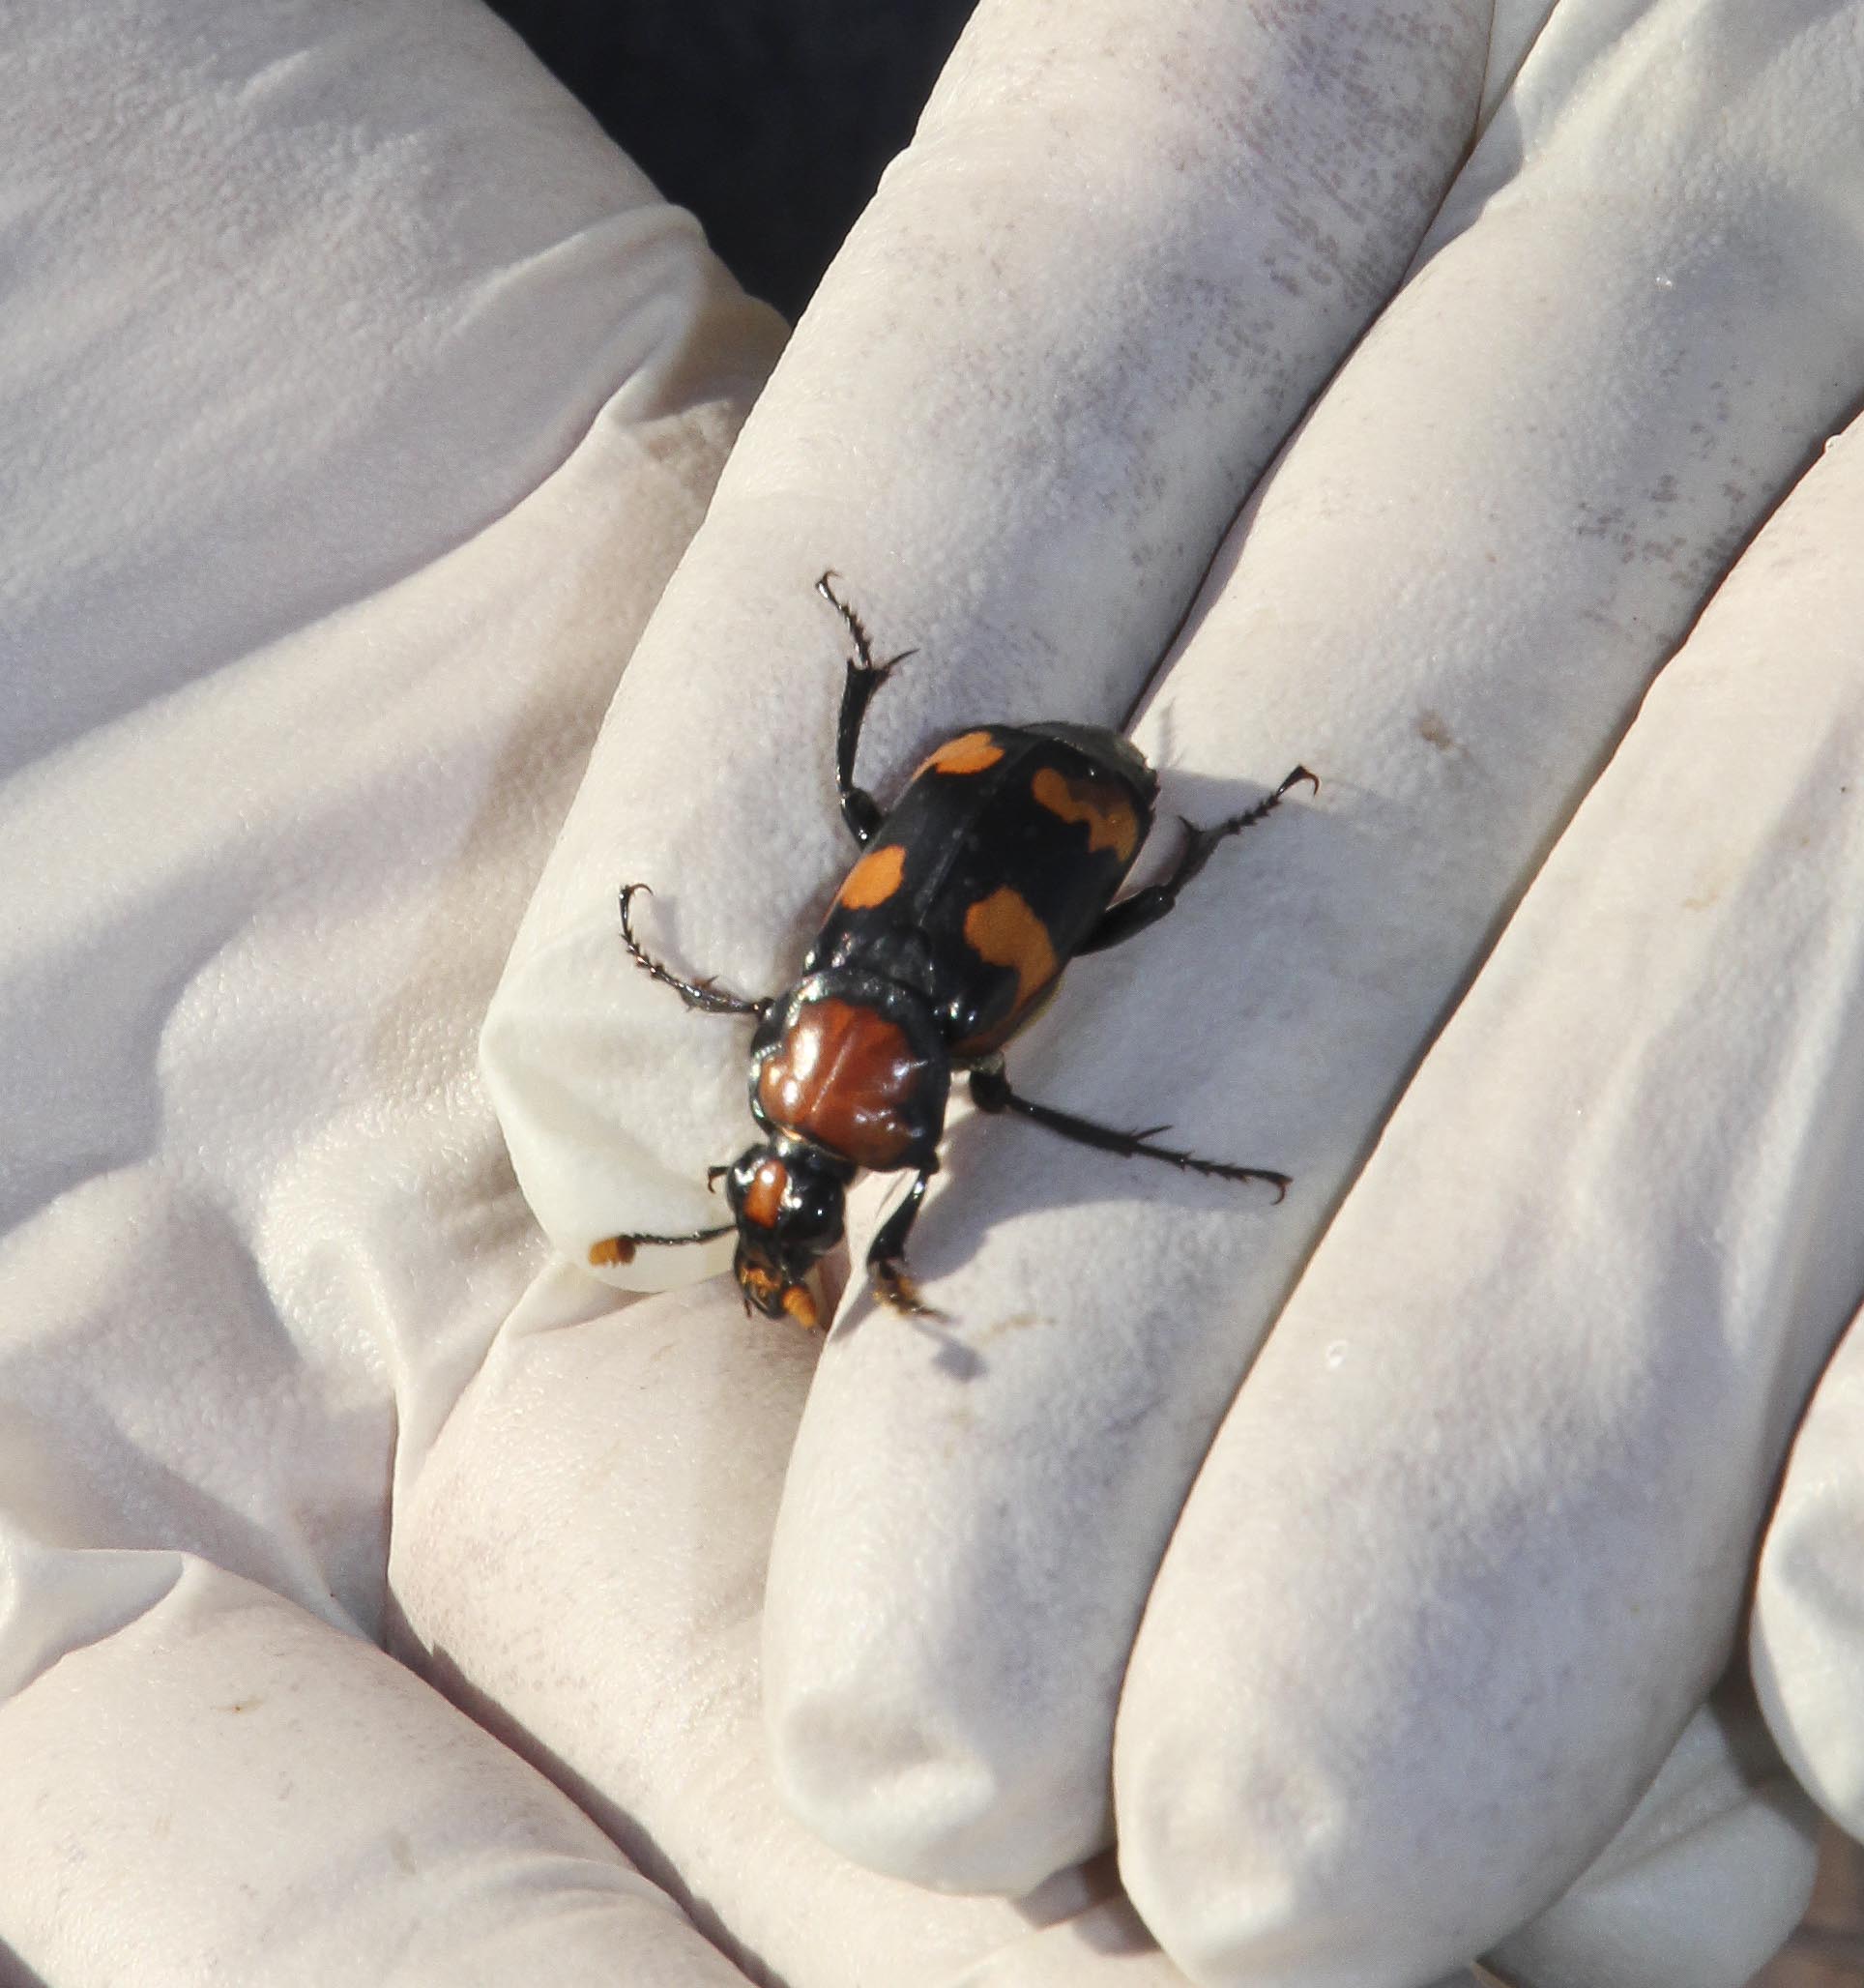 American burying beetle ready for release